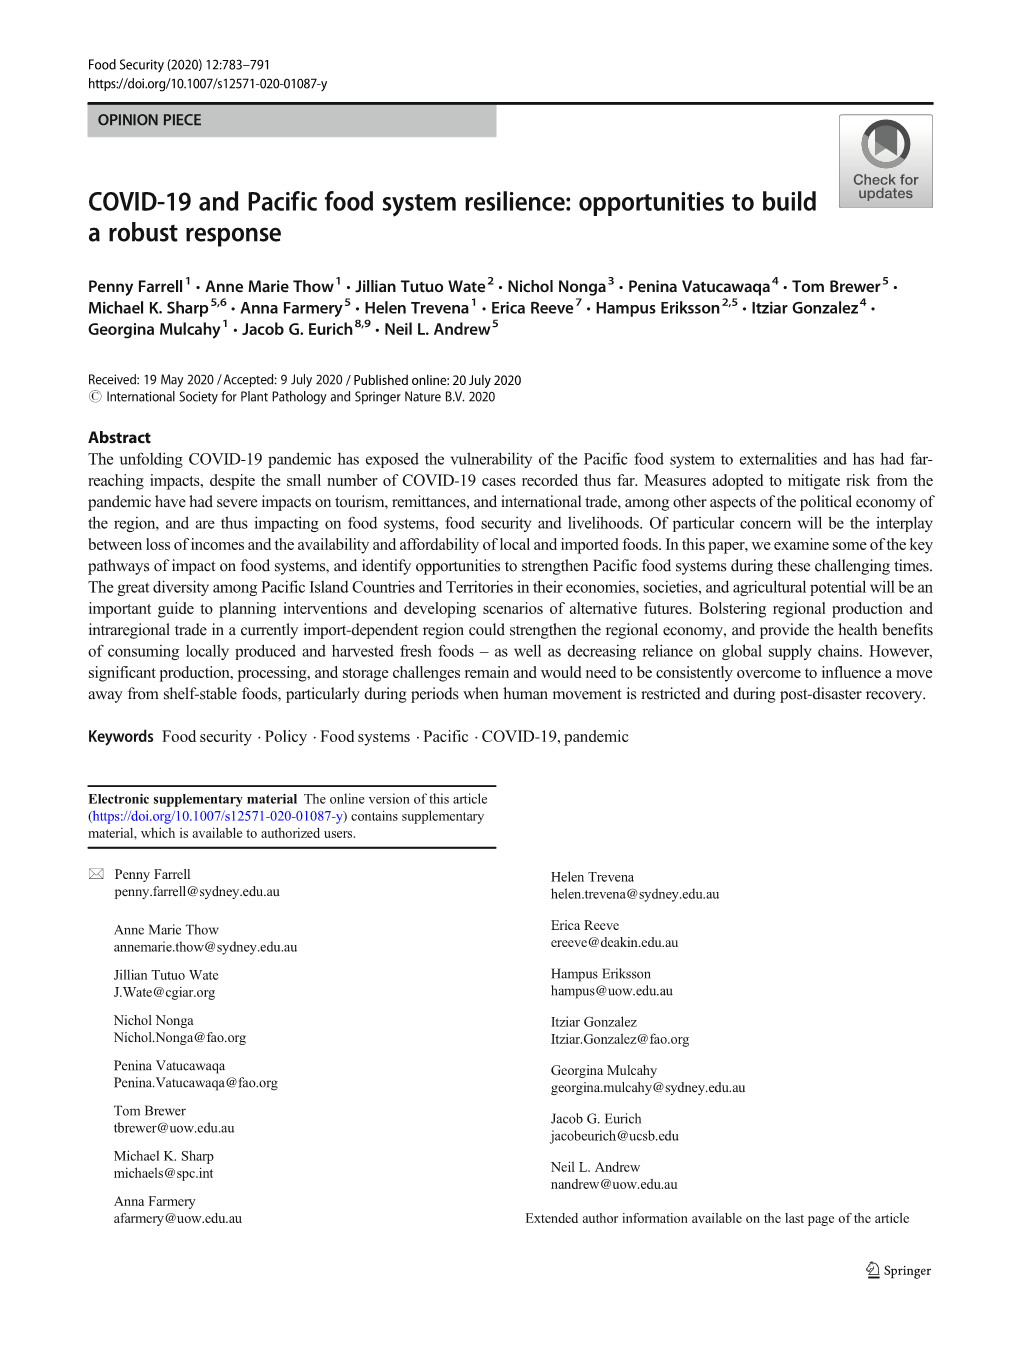 COVID-19 and Pacific Food System Resilience: Opportunities to Build a Robust Response